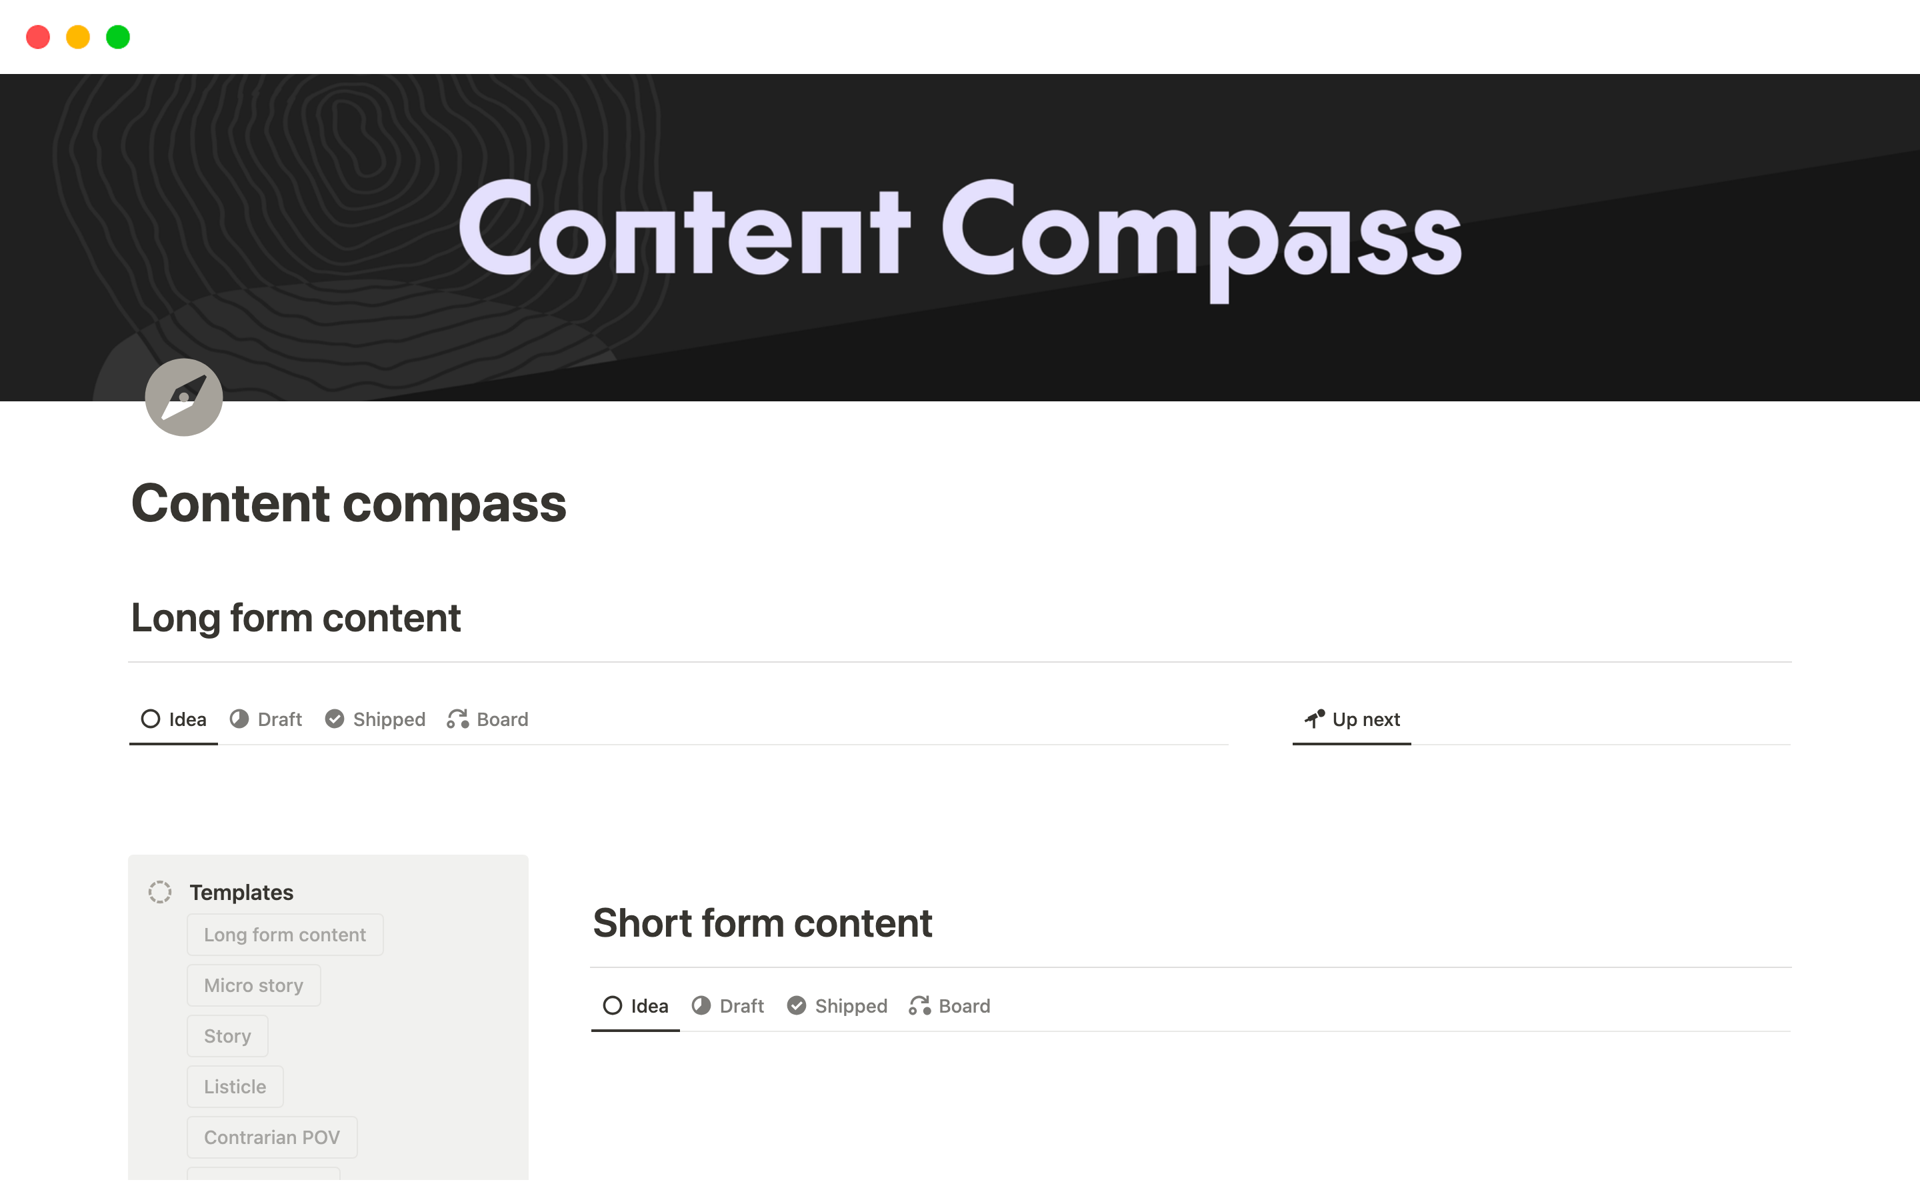 Effortless content management for small businesses and creators. Research, create, organize and schedule all your content in one place.